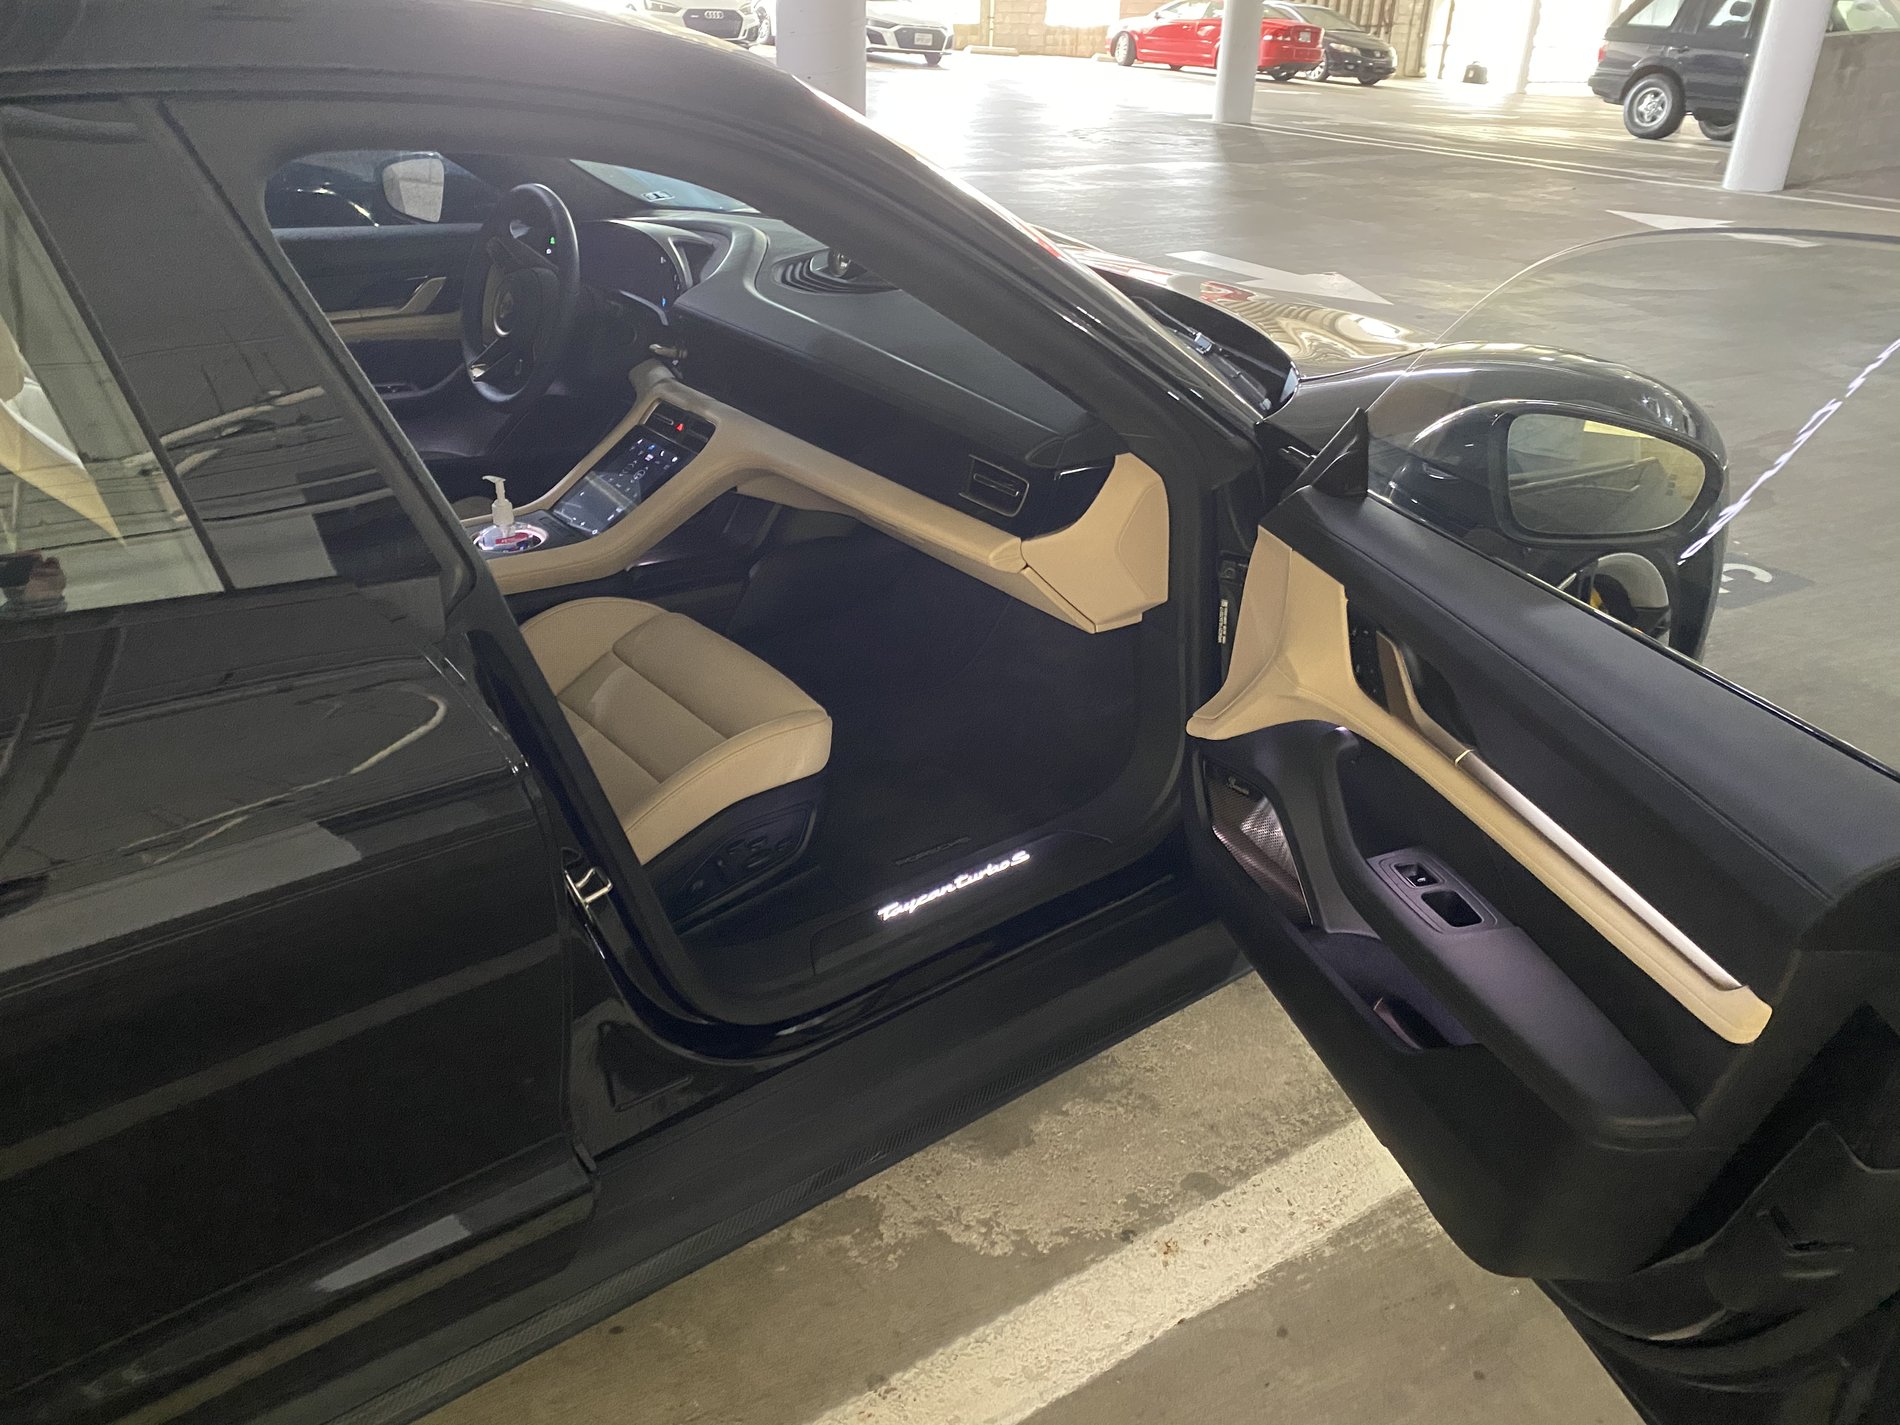 Porsche Taycan Owner’s Notes and Tips From 800 Mile Road Trip in Taycan Turbo S ACBB3125-532A-4D44-8854-ABAF04D04210